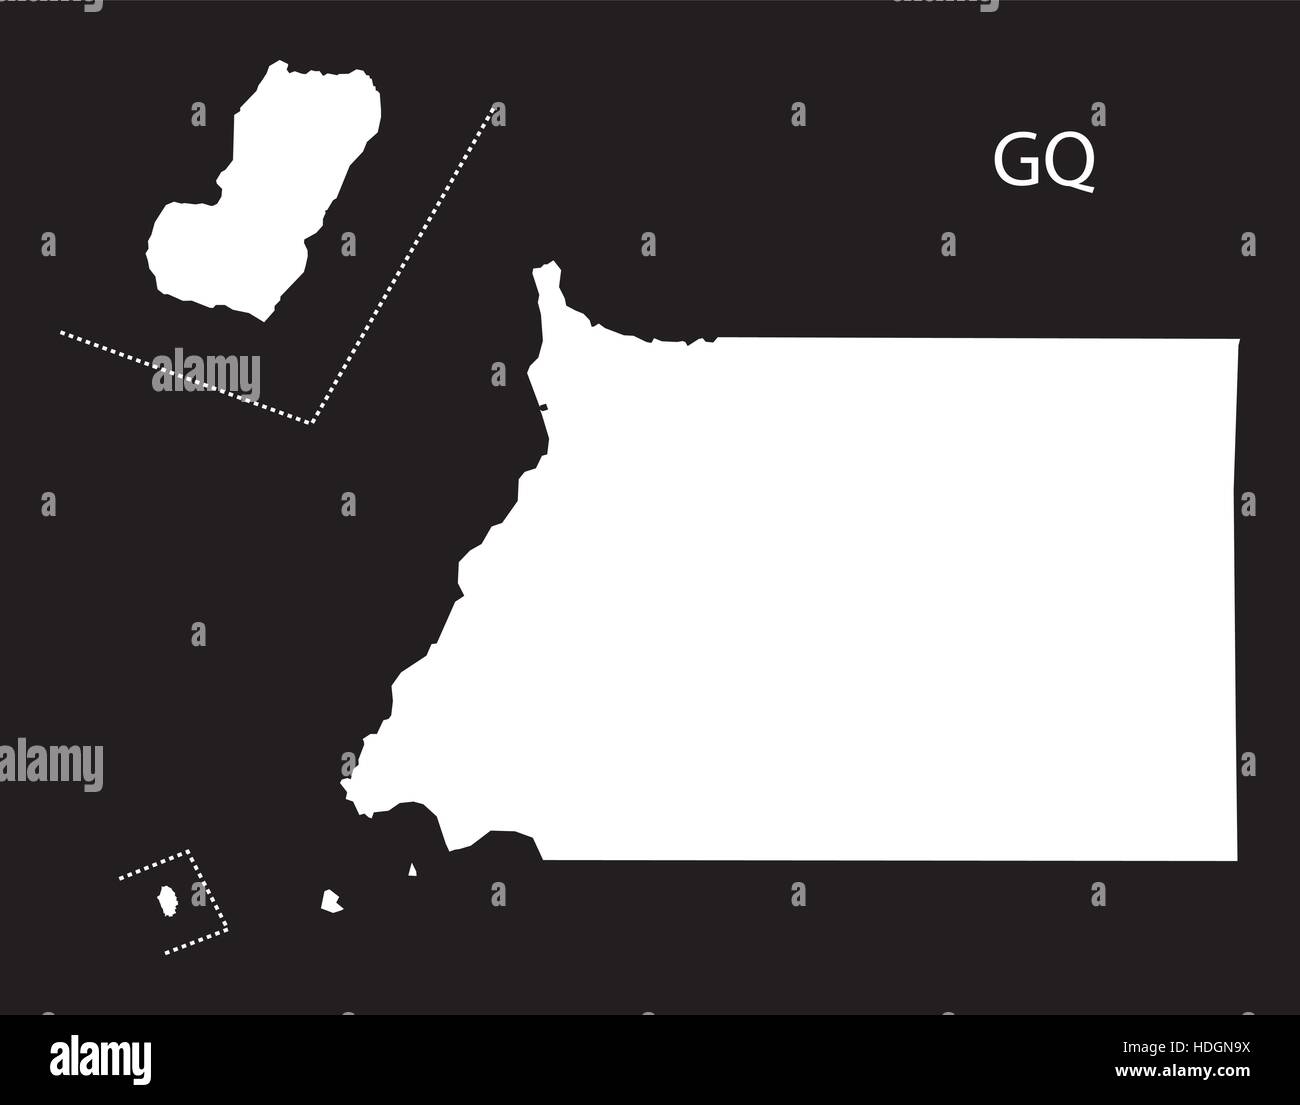 Equatorial Guinea Map black and white illustration Stock Vector